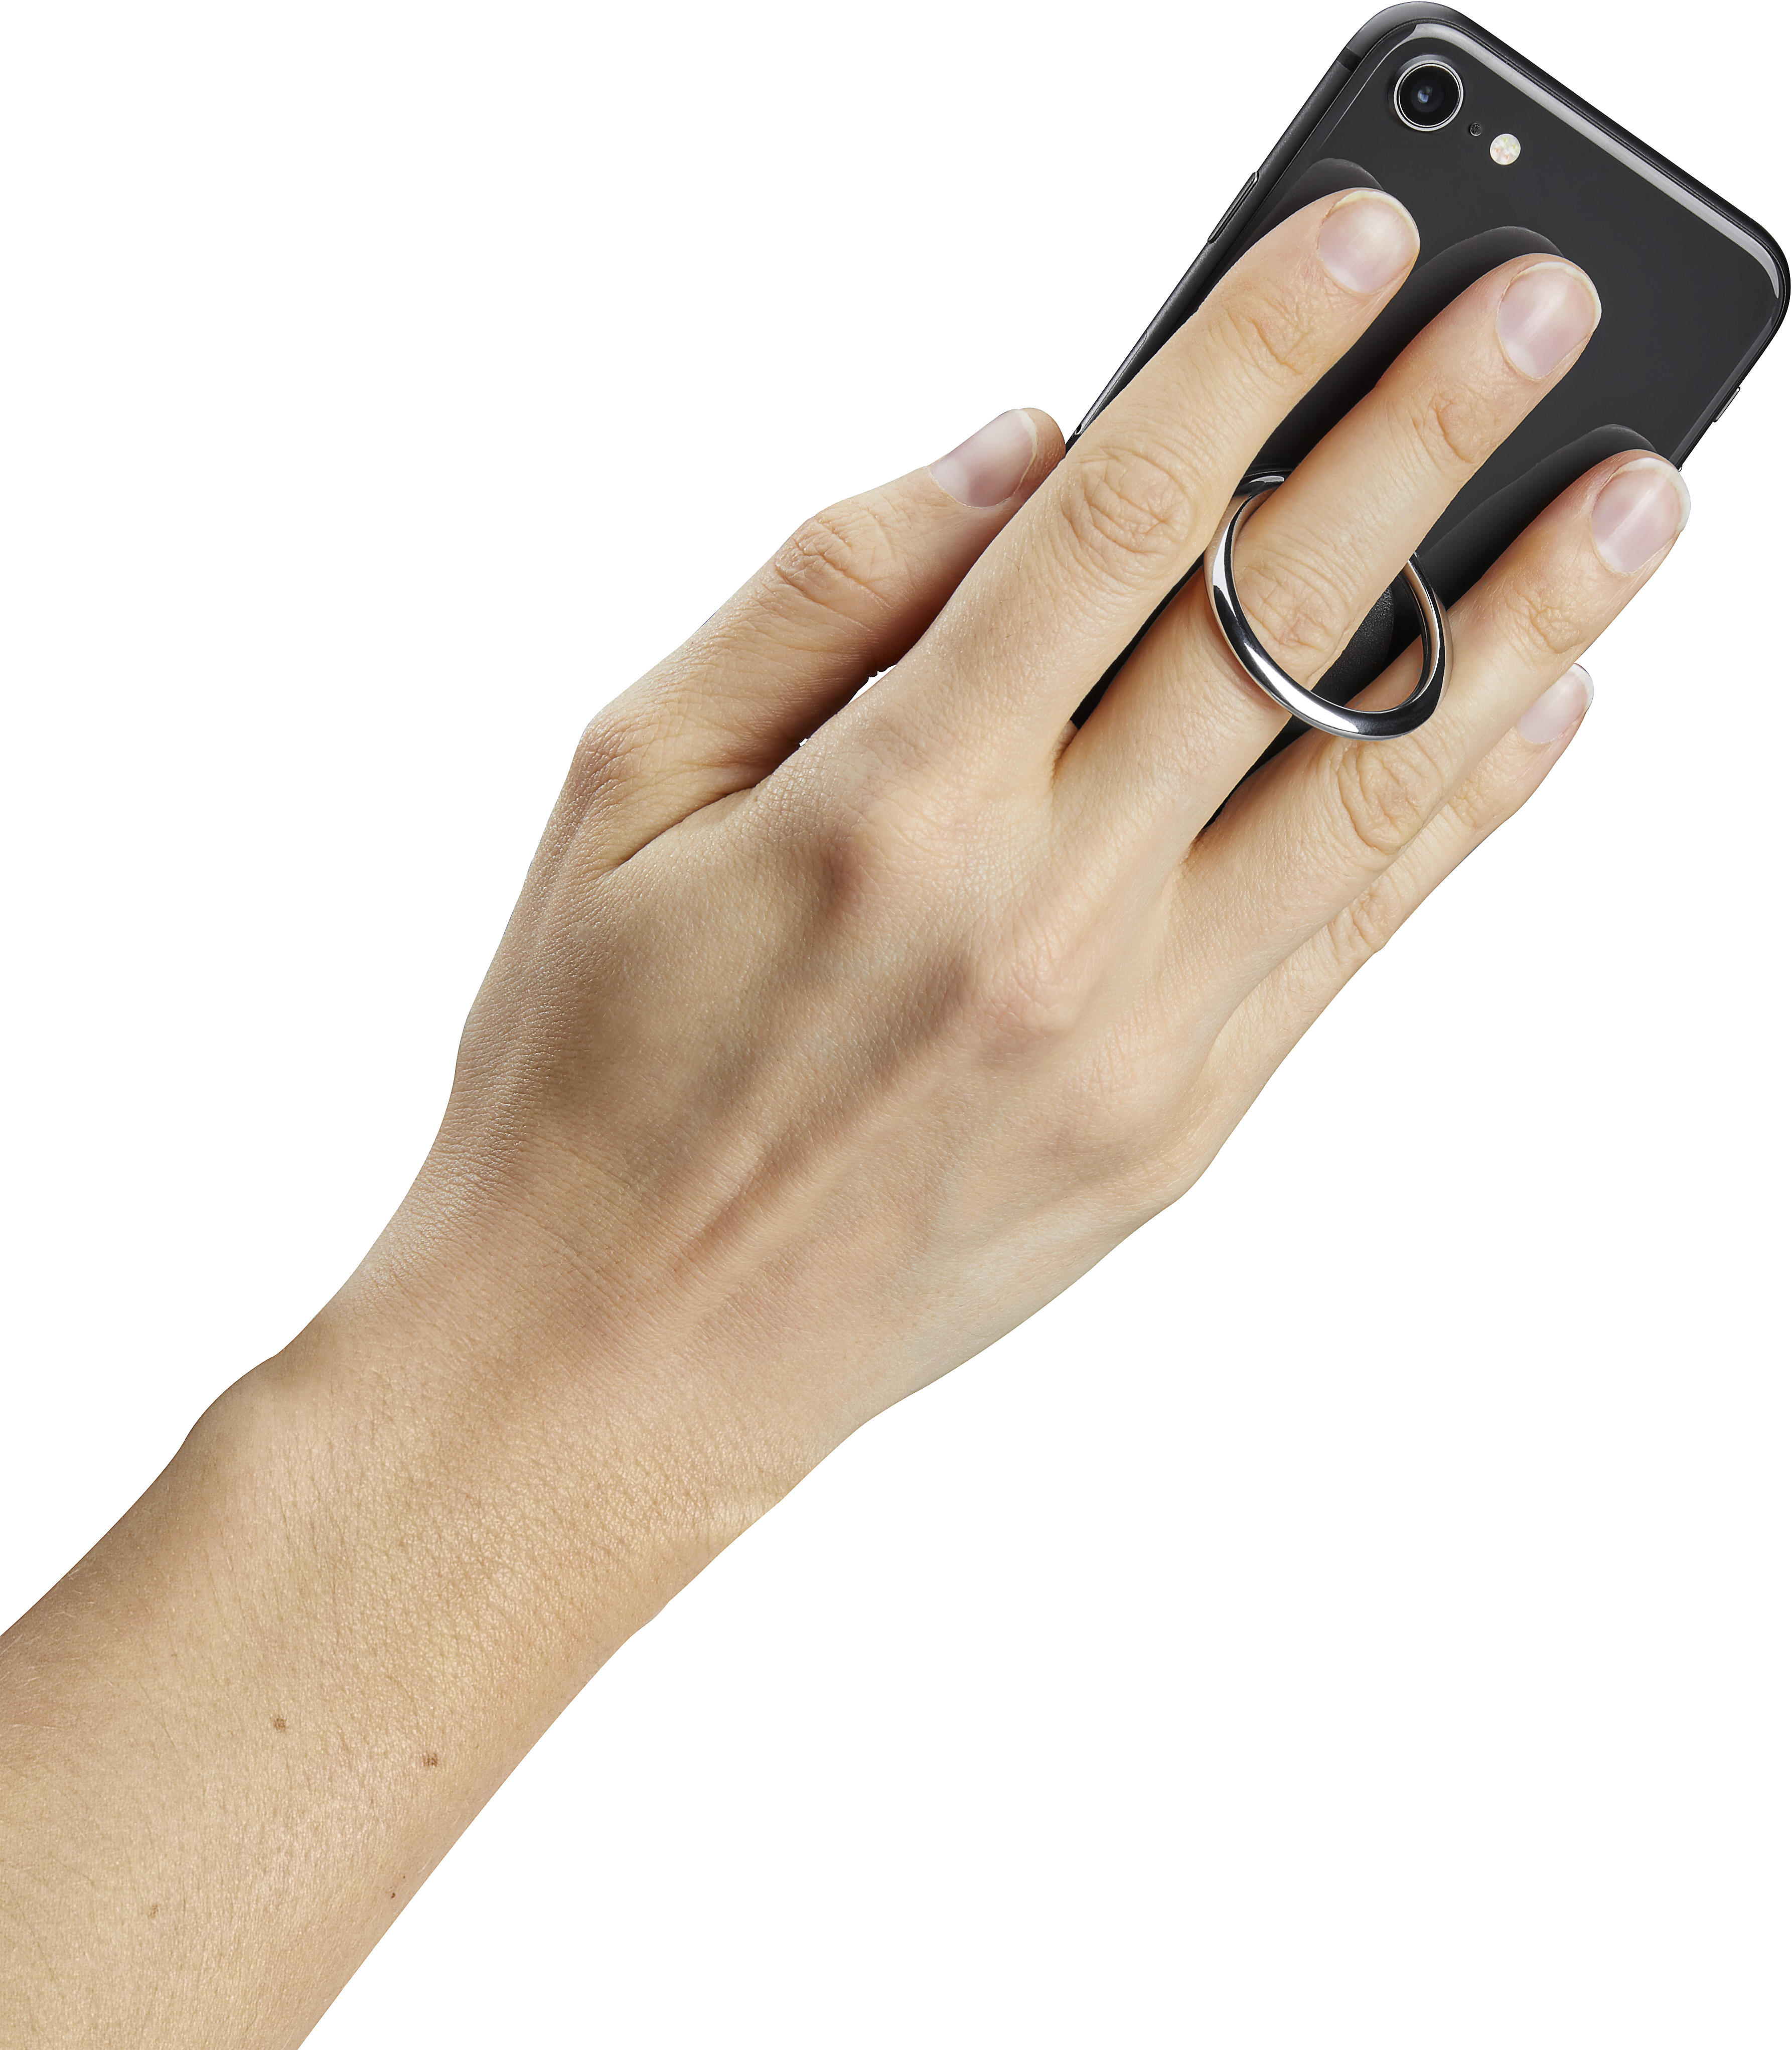 CLIP Smartphone ring with Loop